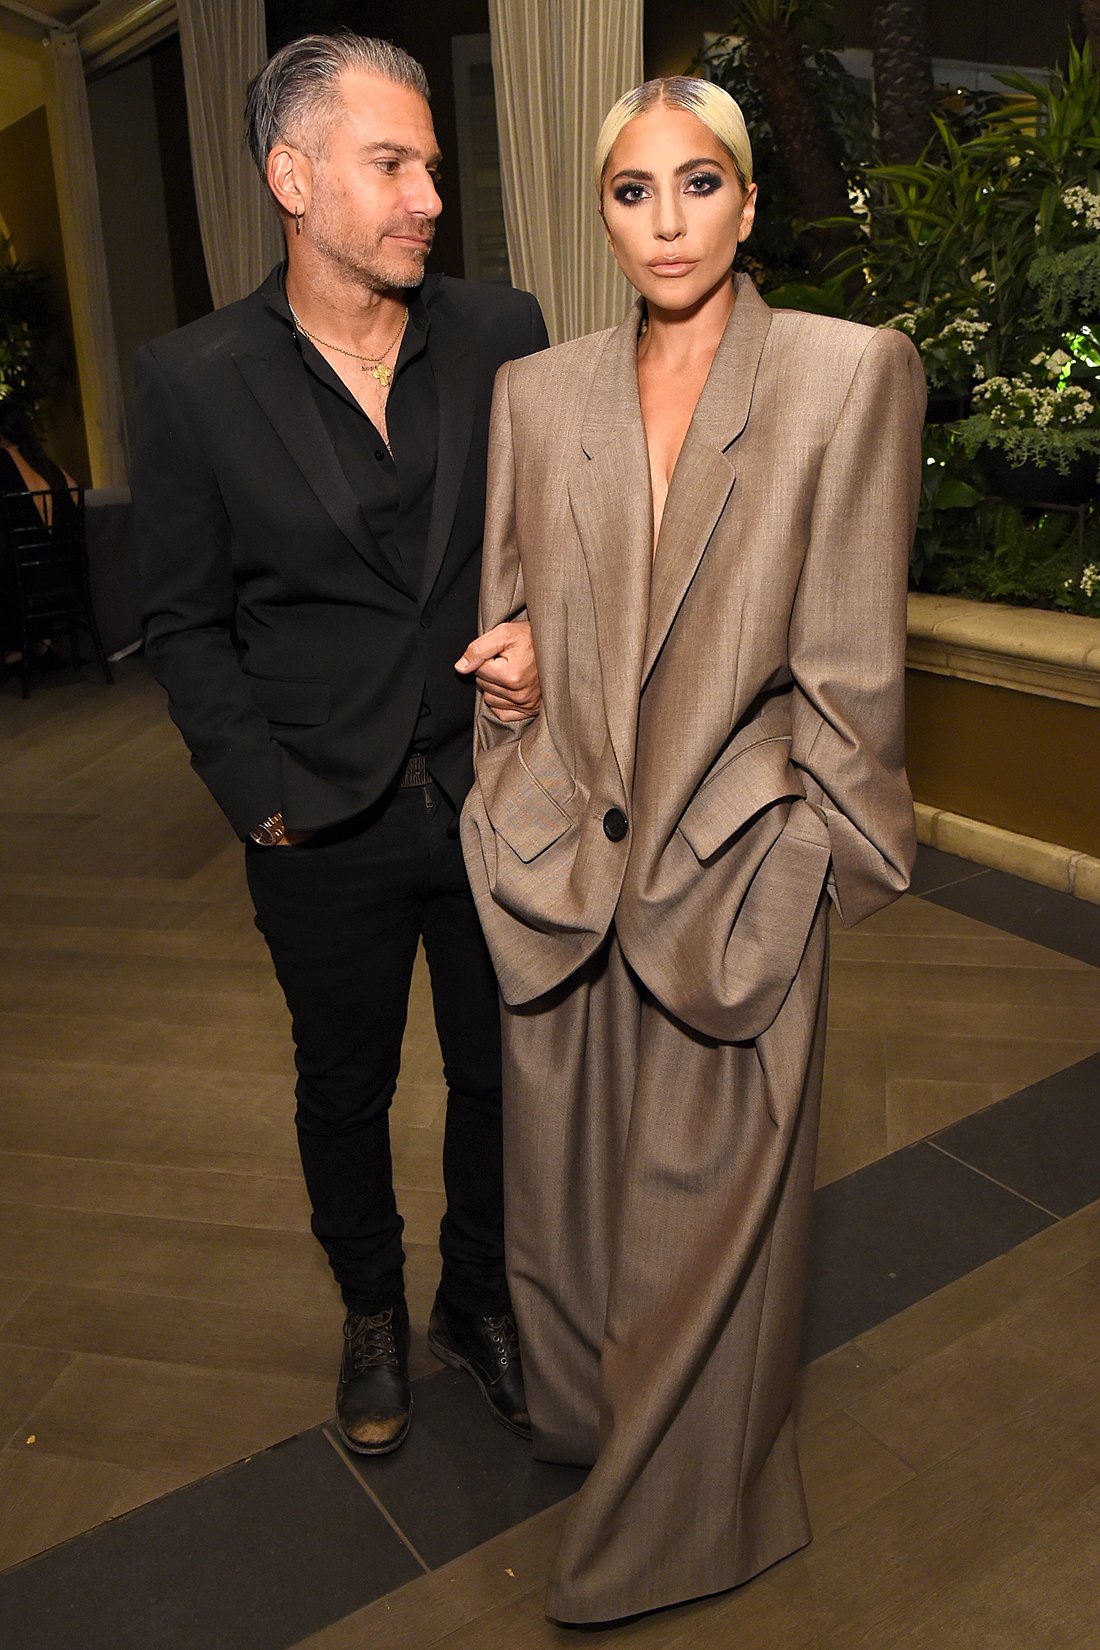 LOS ANGELES, CA - OCTOBER 15:  Christian Carino (L) and Lady Gaga attend ELLE's 25th Annual Women In Hollywood Celebration presented by L'Oreal Paris, Hearts On Fire and CALVIN KLEIN at Four Seasons Hotel Los Angeles at Beverly Hills on October 15, 2018 in Los Angeles, California.  (Photo by Michael Kovac/Getty Images for ELLE Magazine)